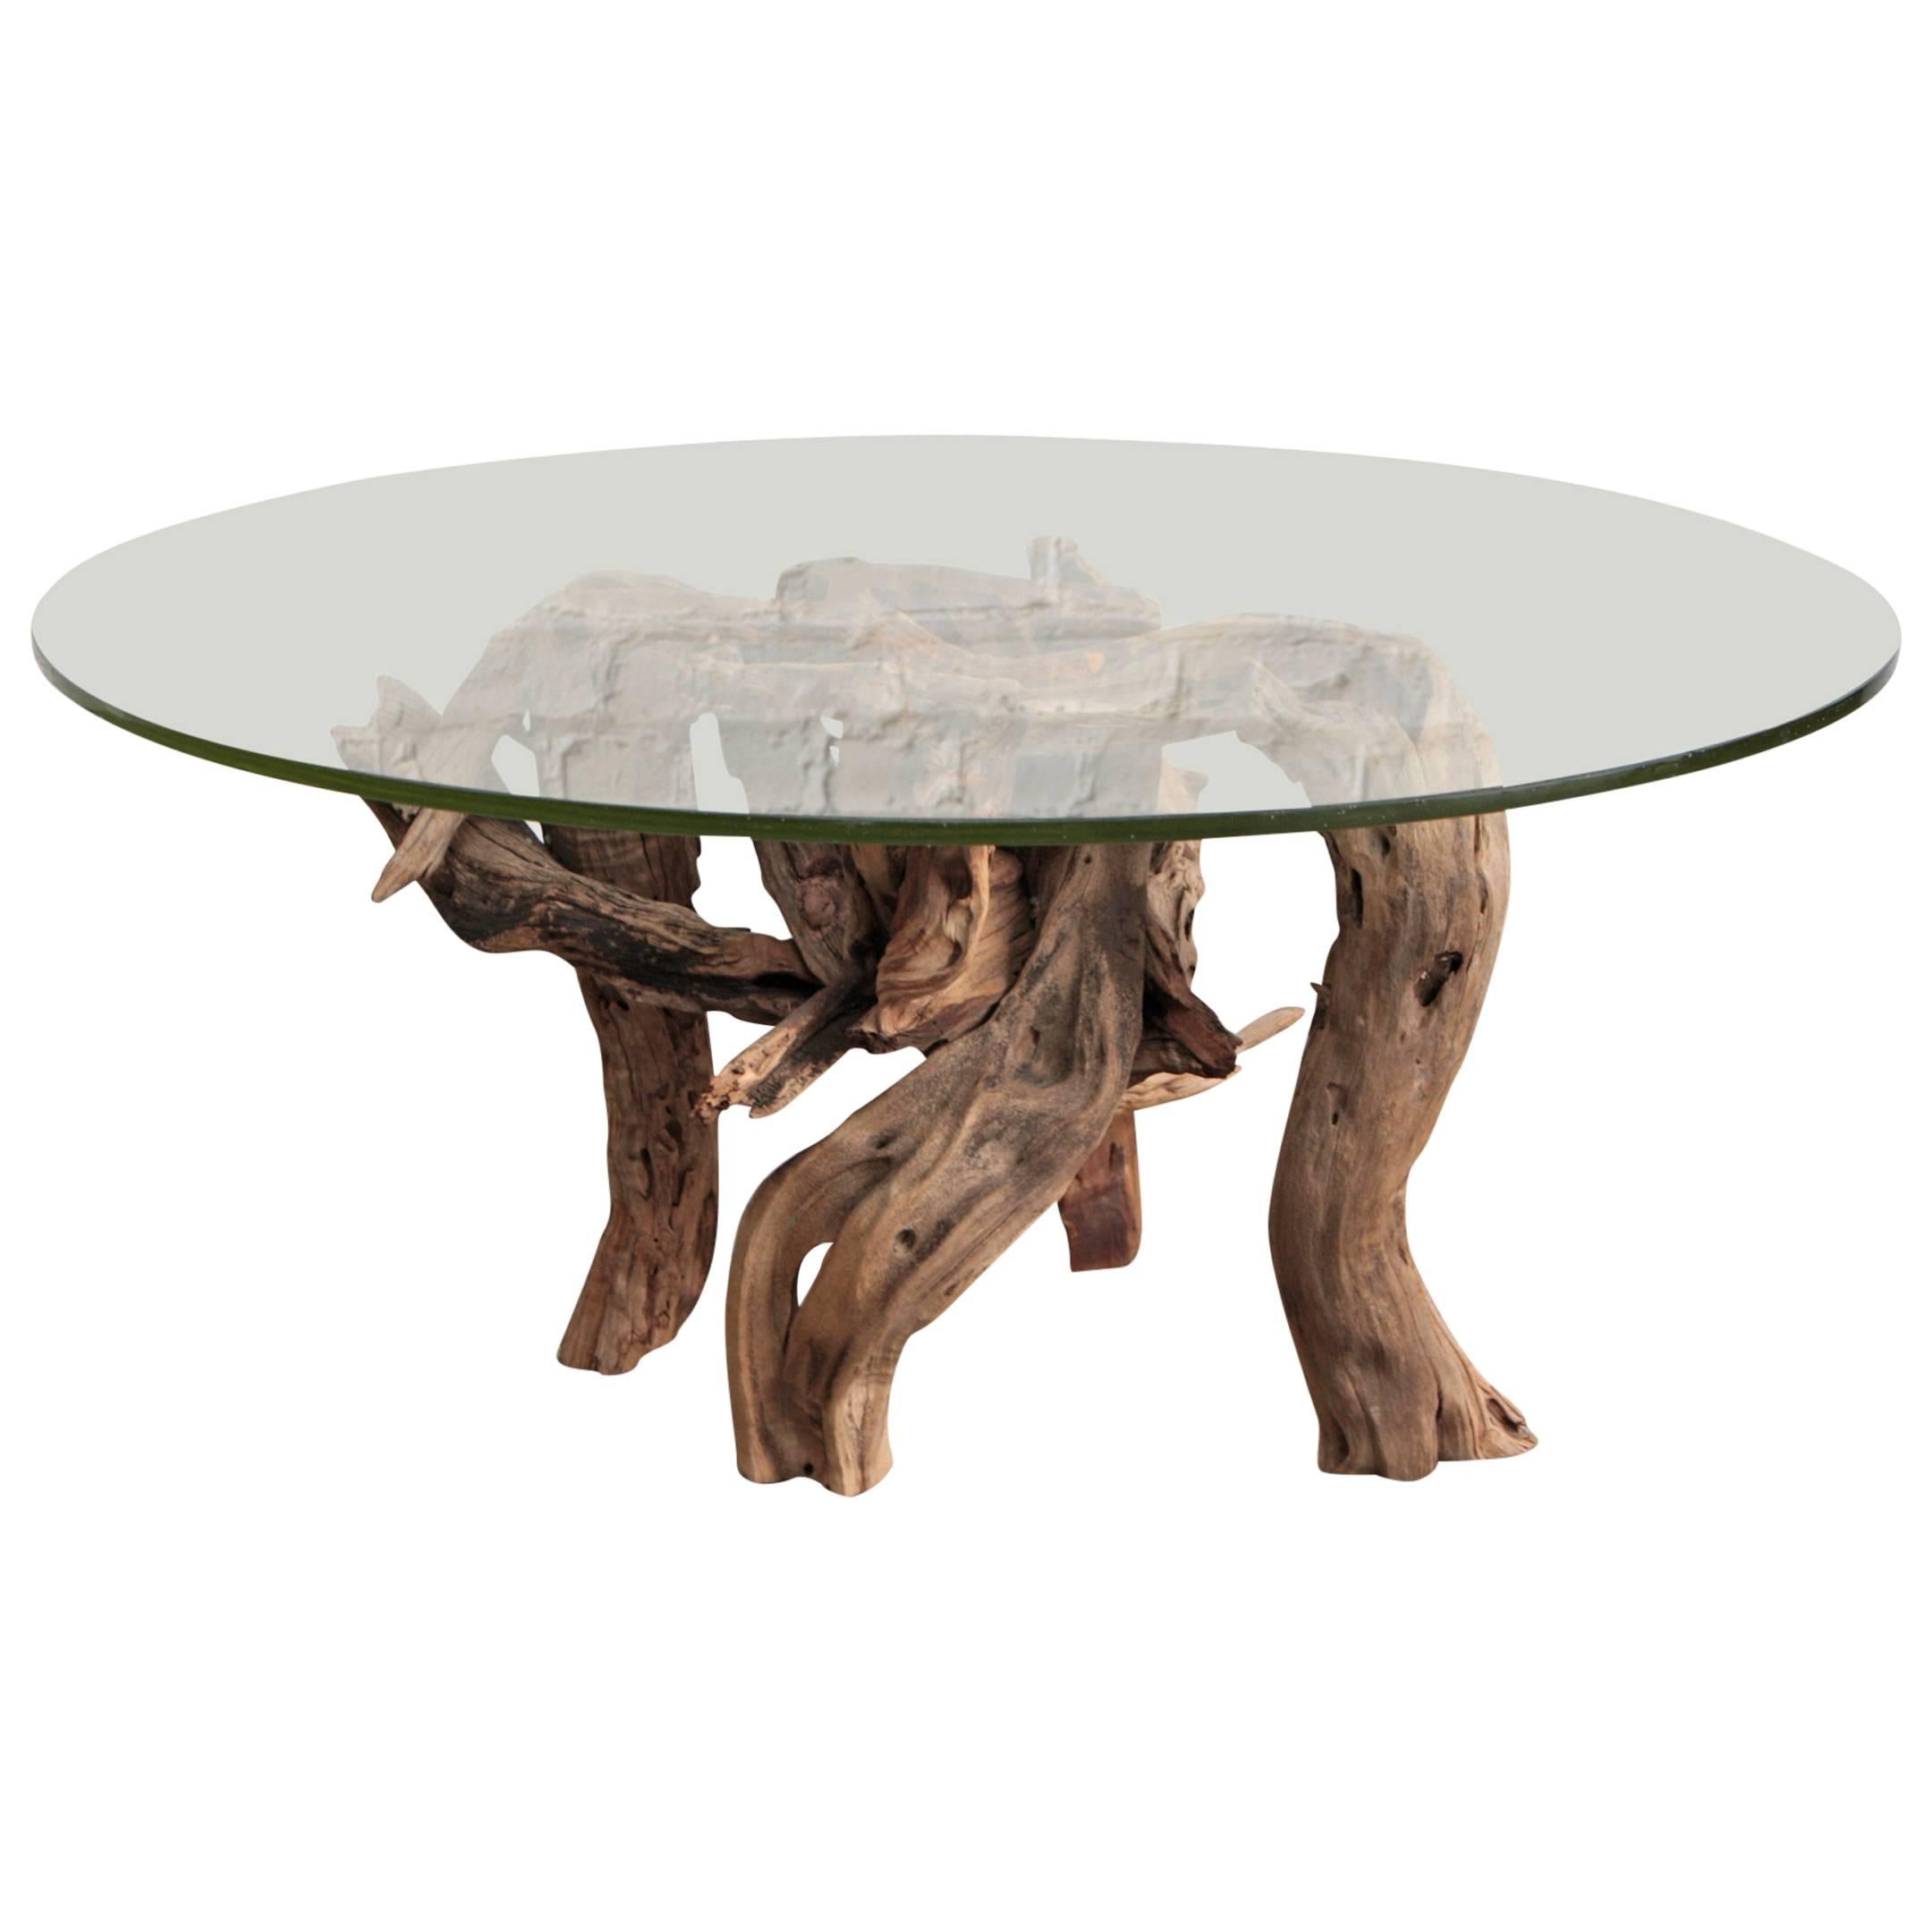 Driftwood Coffee Table Round Glass Top